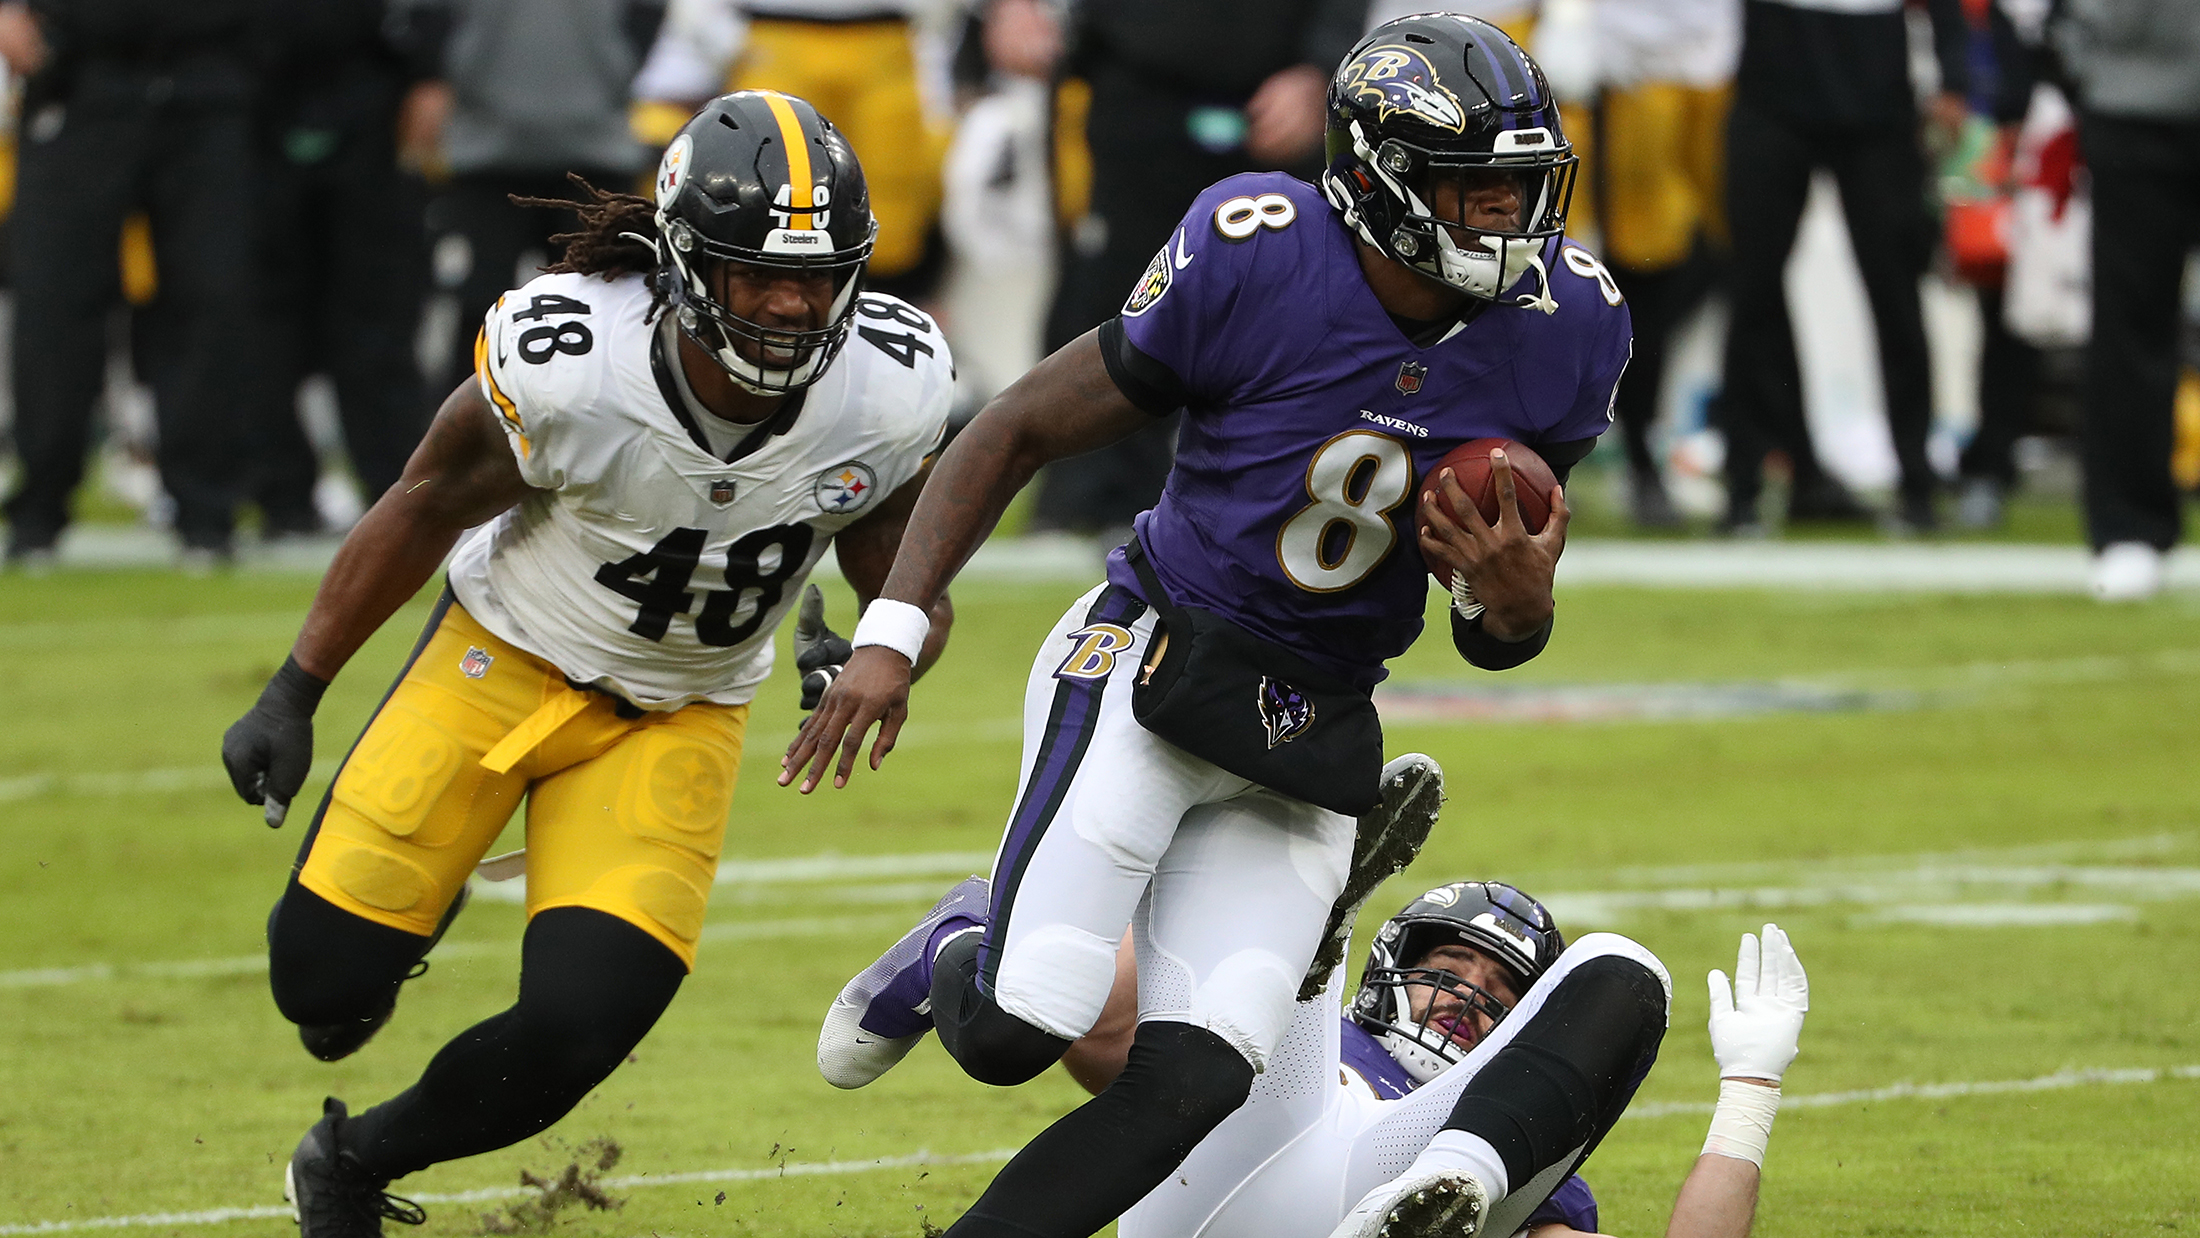 Ravens-Steelers game moved to Wednesday